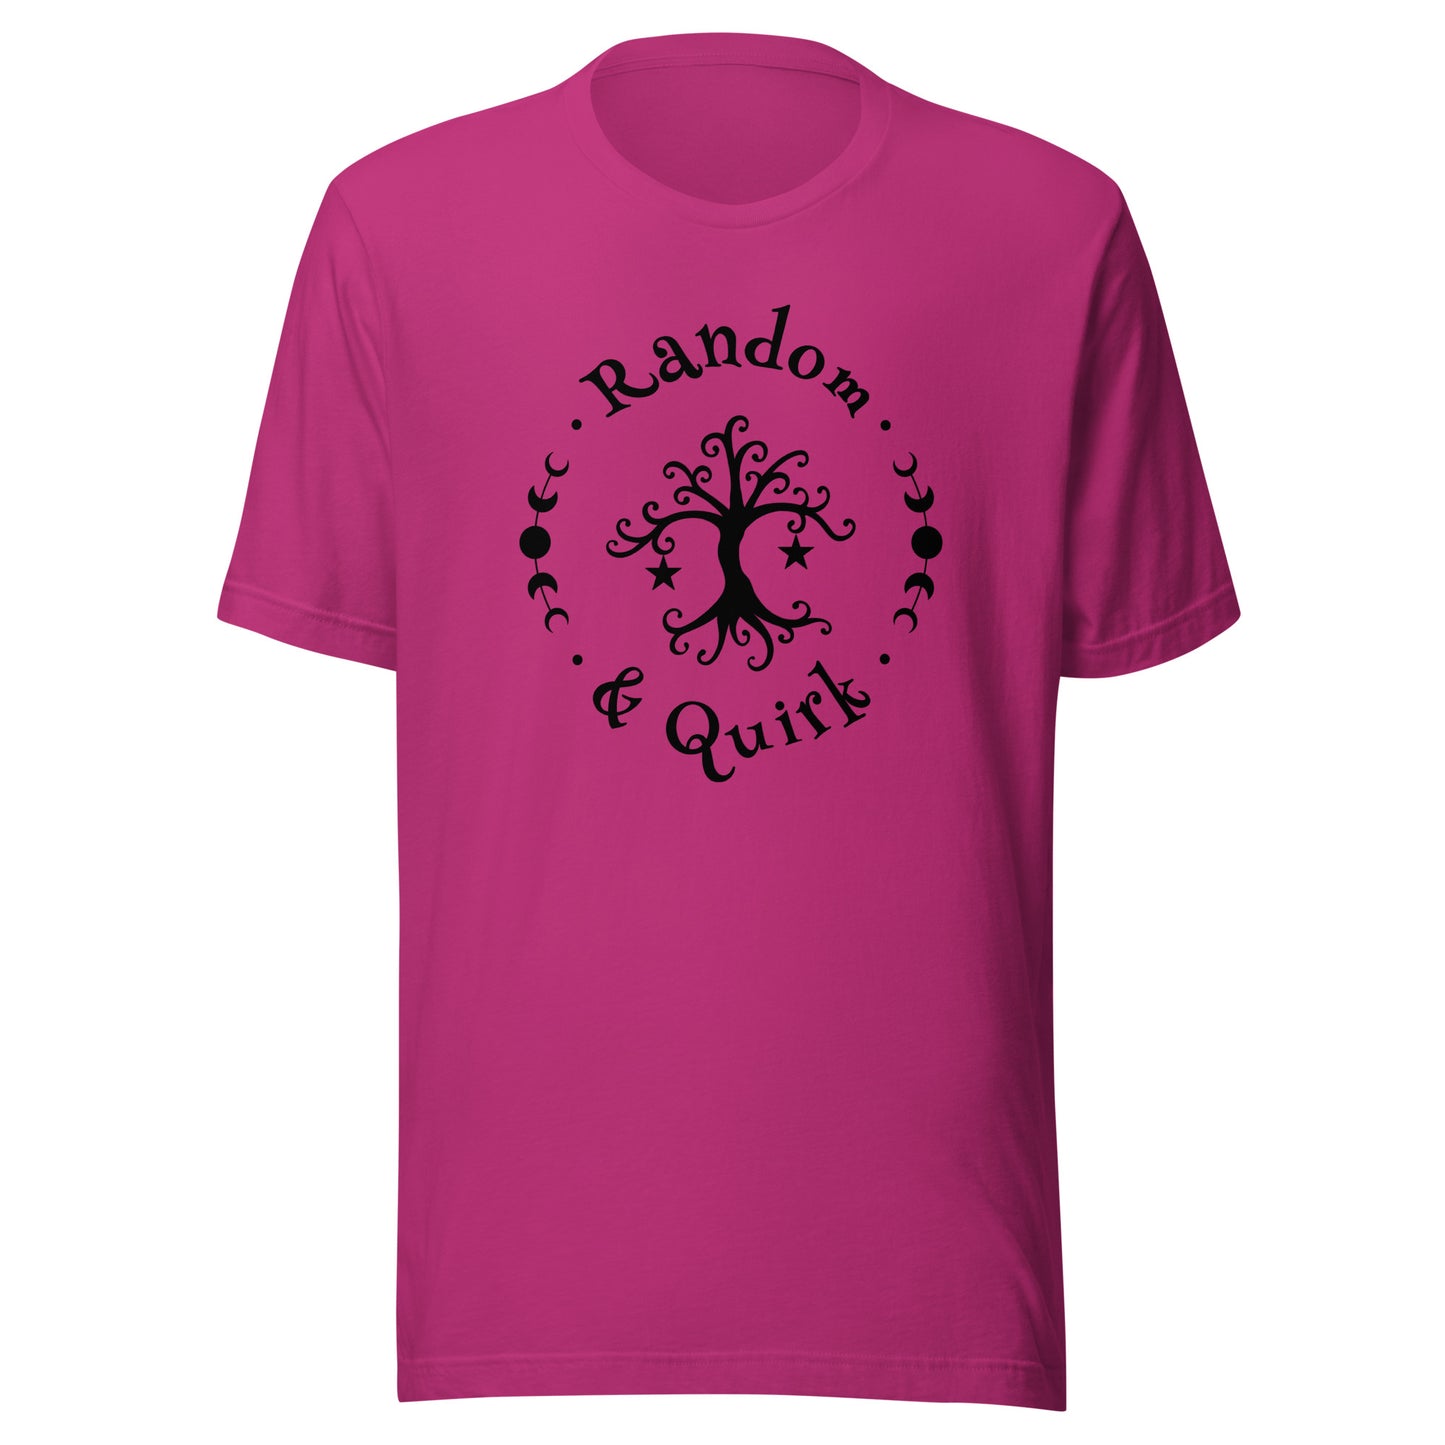 Commissions - random and quirk logo T shirt, black logo, berry pink